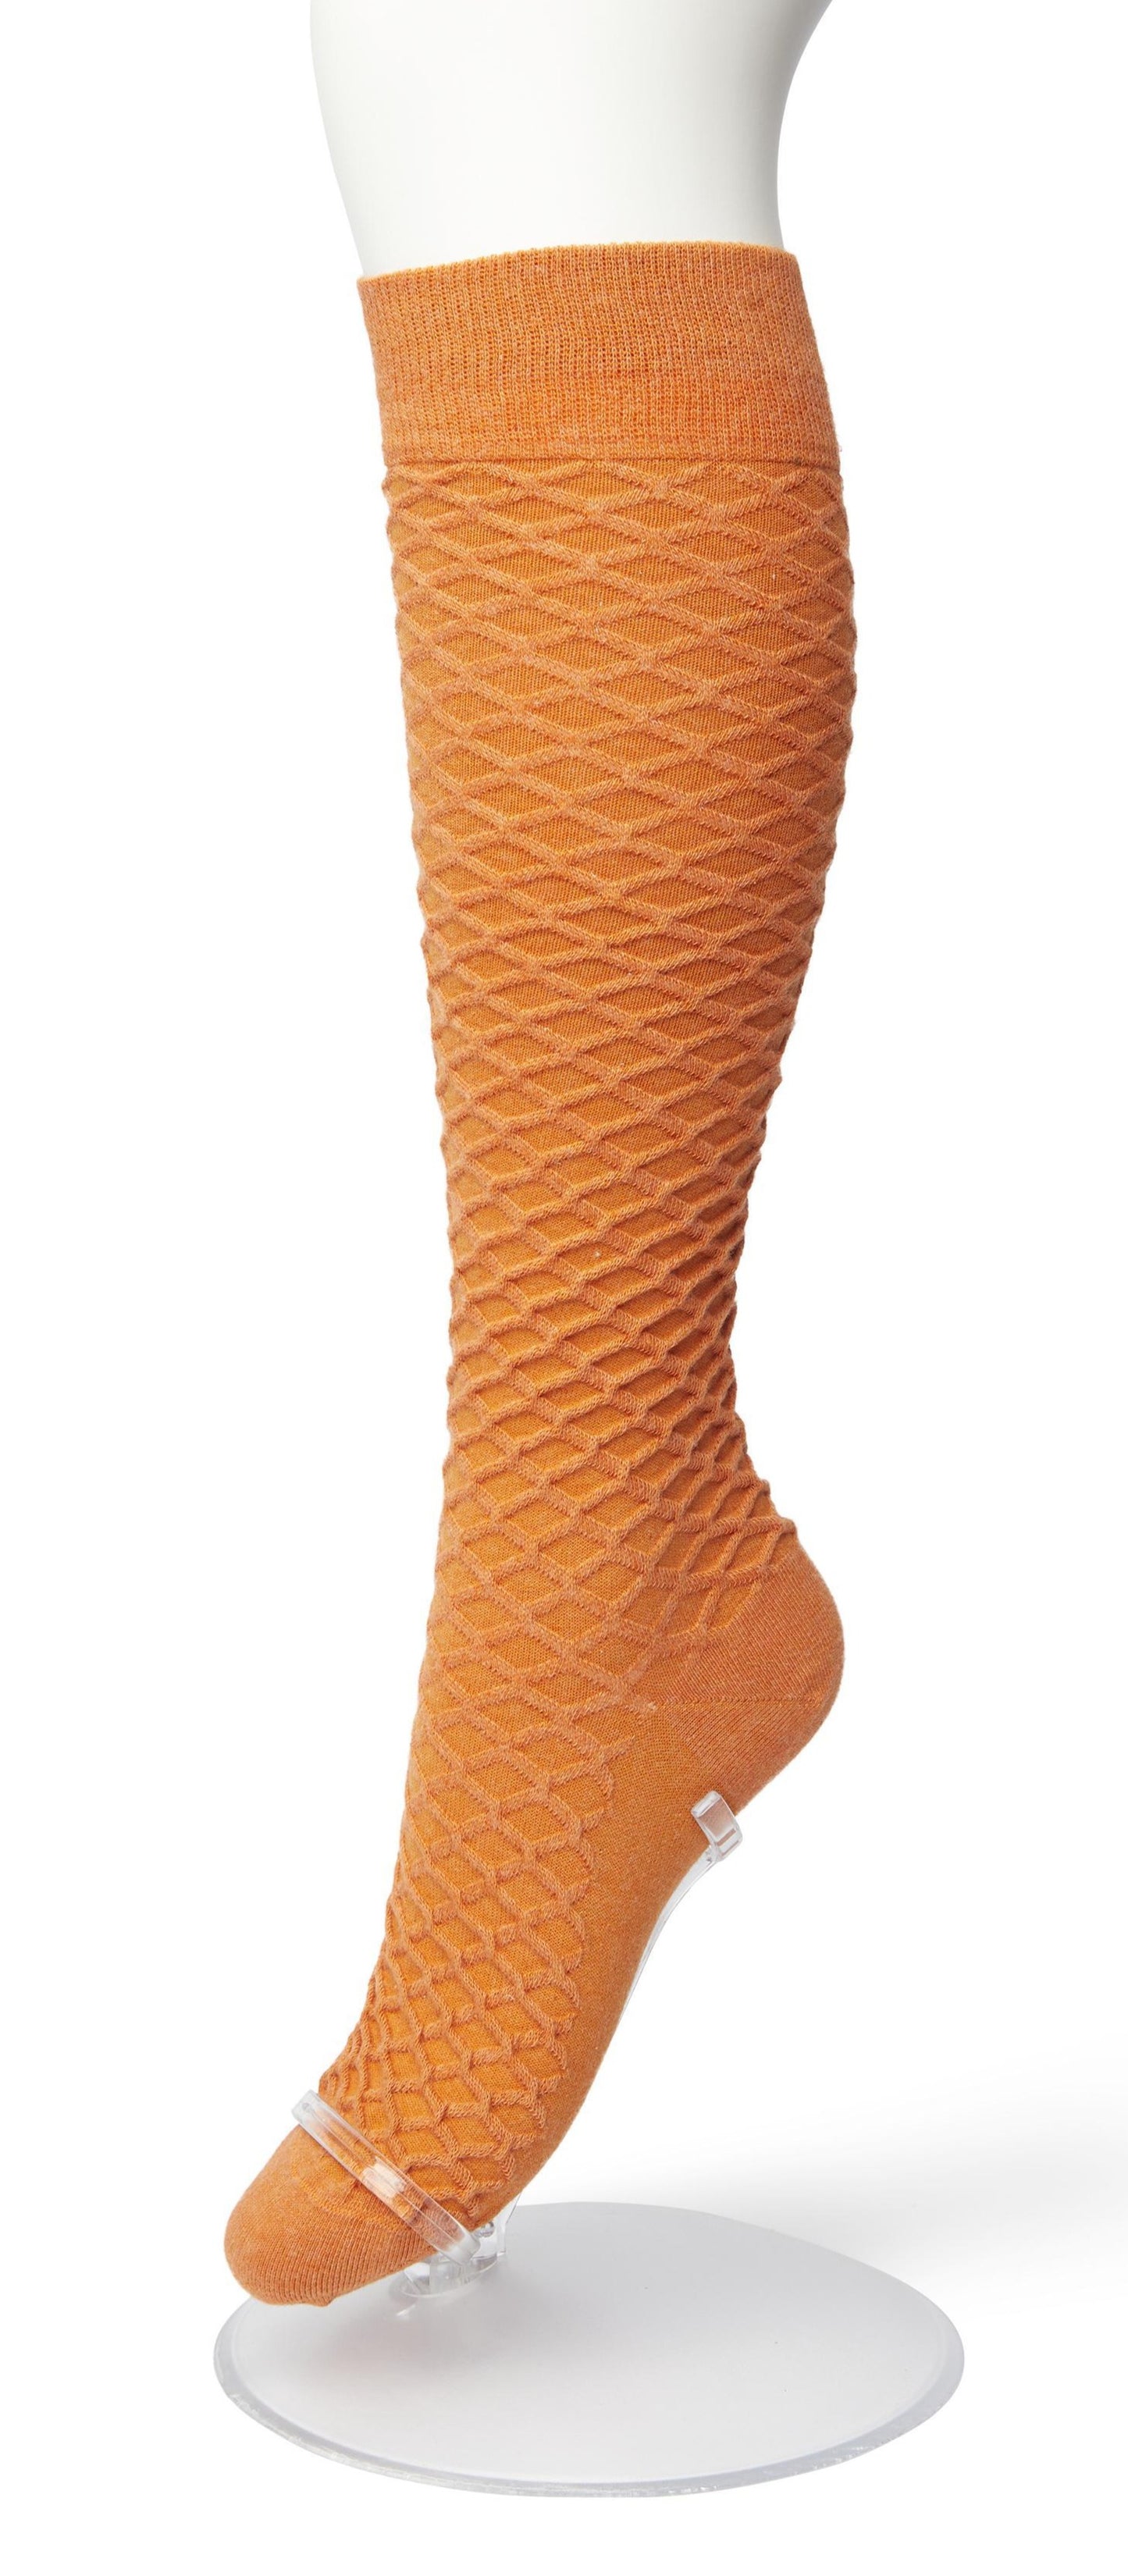 Bonnie Doon BP211506 Cable Knee-highs - Rust orange (sudan brown) soft and warm knitted knee-high socks with a criss-cross diamond textured pattern